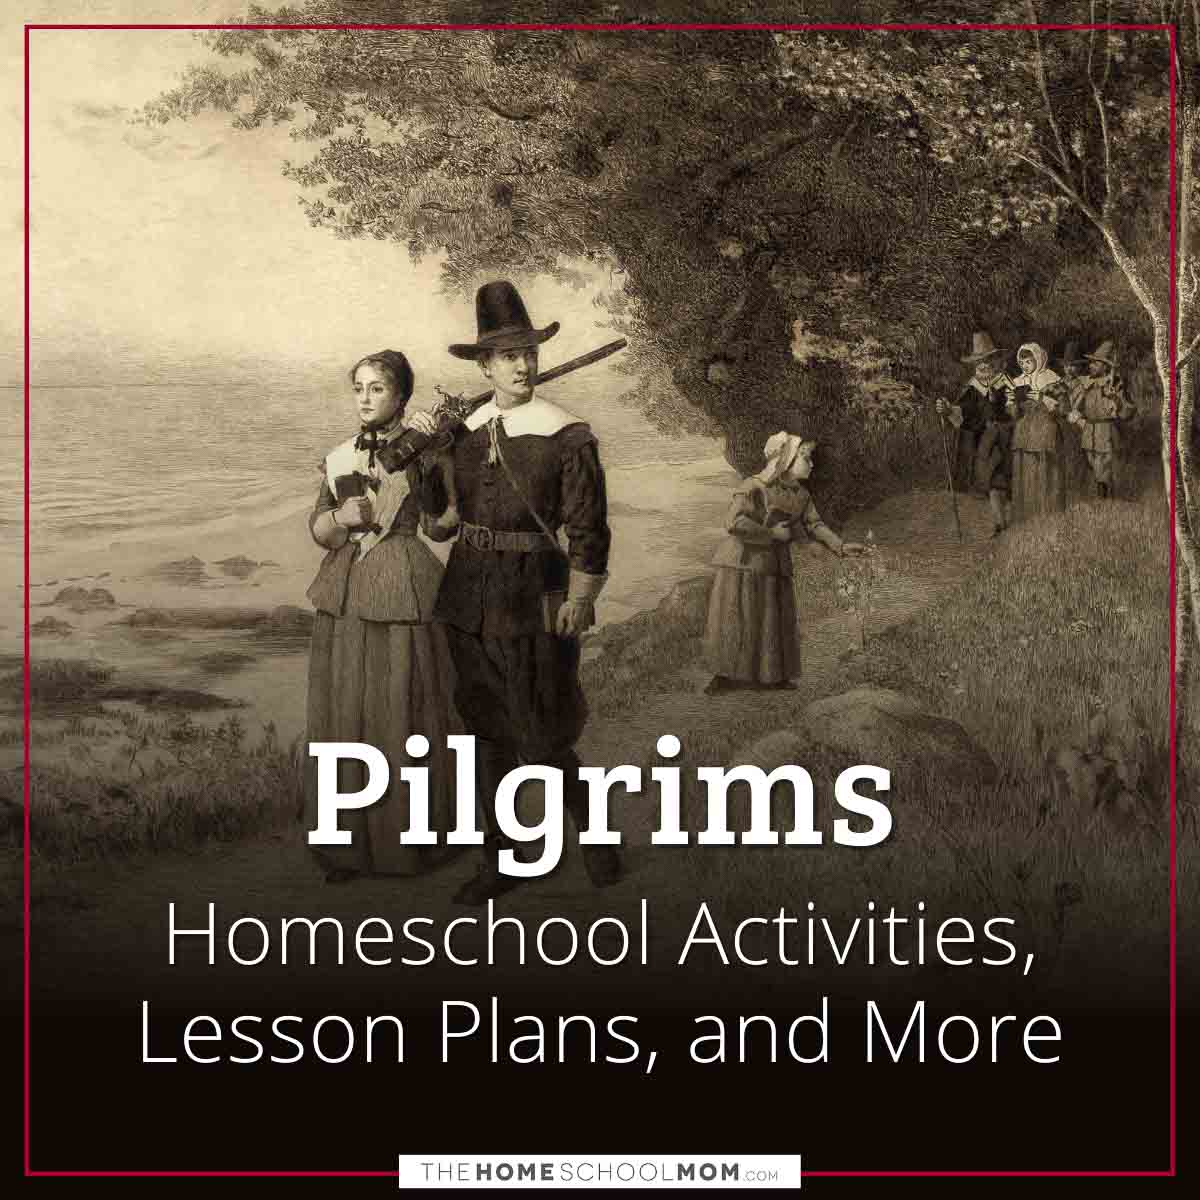 Pilgrims Homeschool Activities, Lesson Plans, and More.